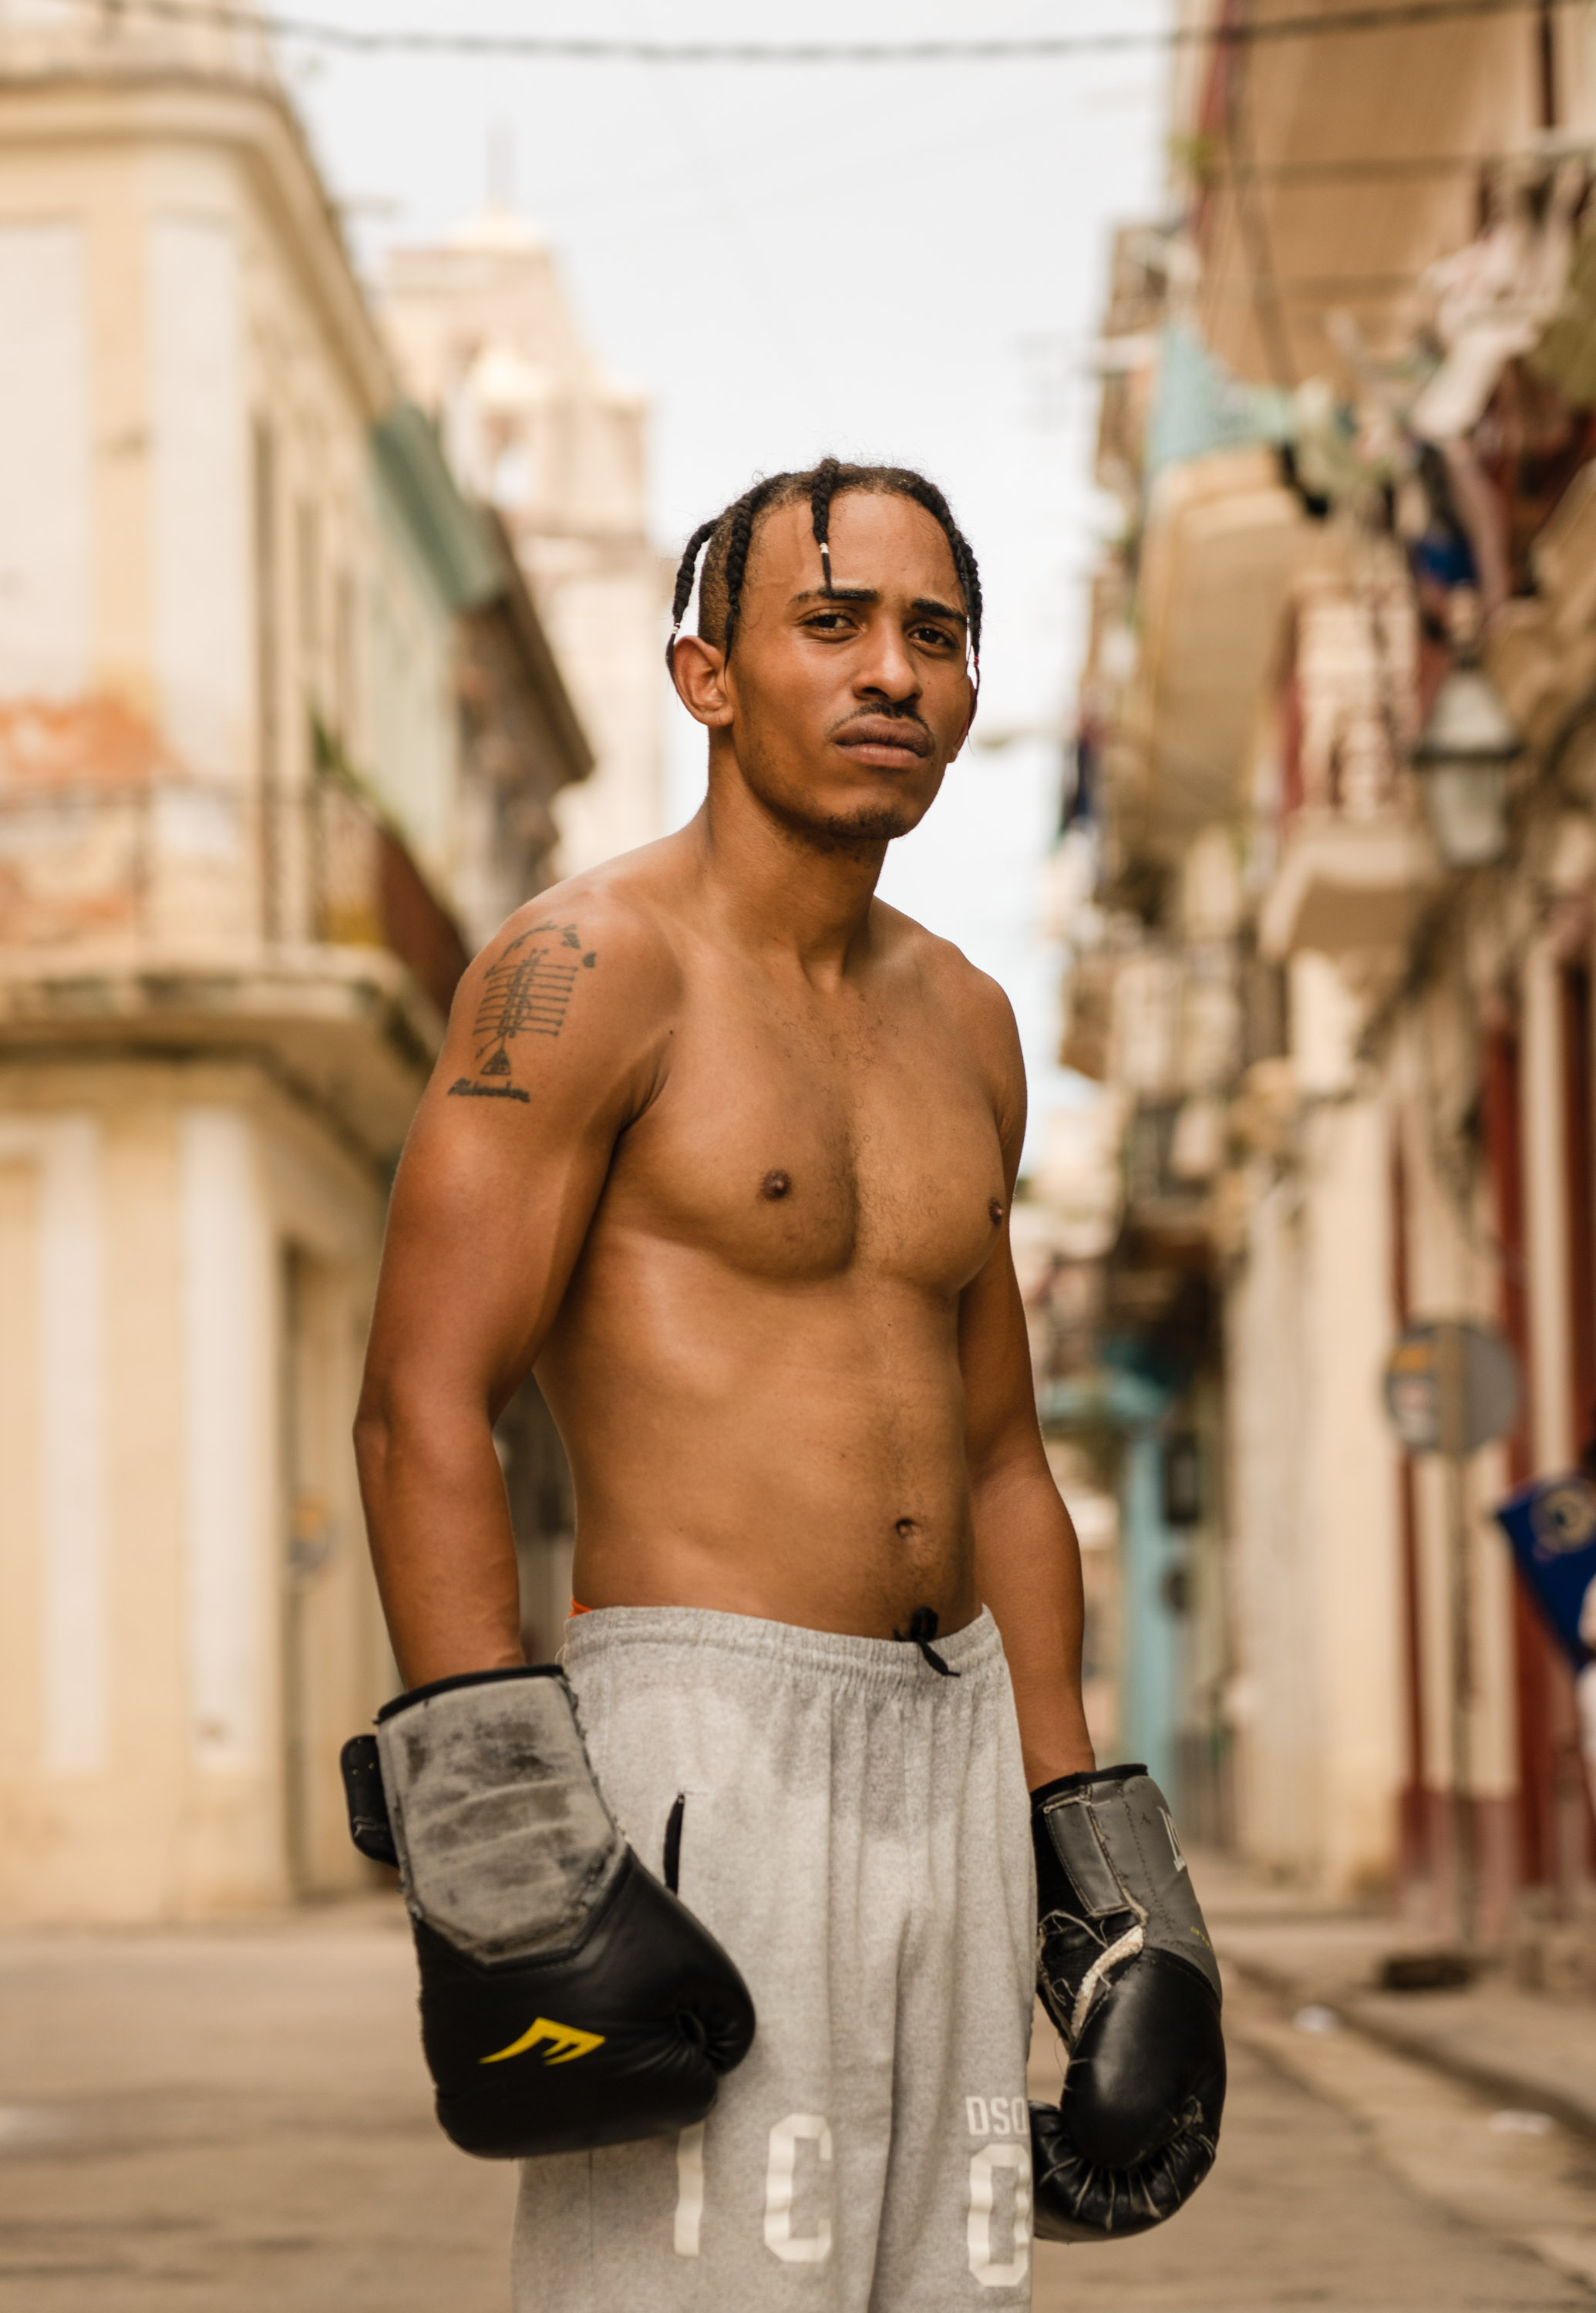 Havana, Cuba, August 14th, 2018: Man Getting Fit at Cuban Gym Editorial  Stock Photo - Image of time, ground: 126153873